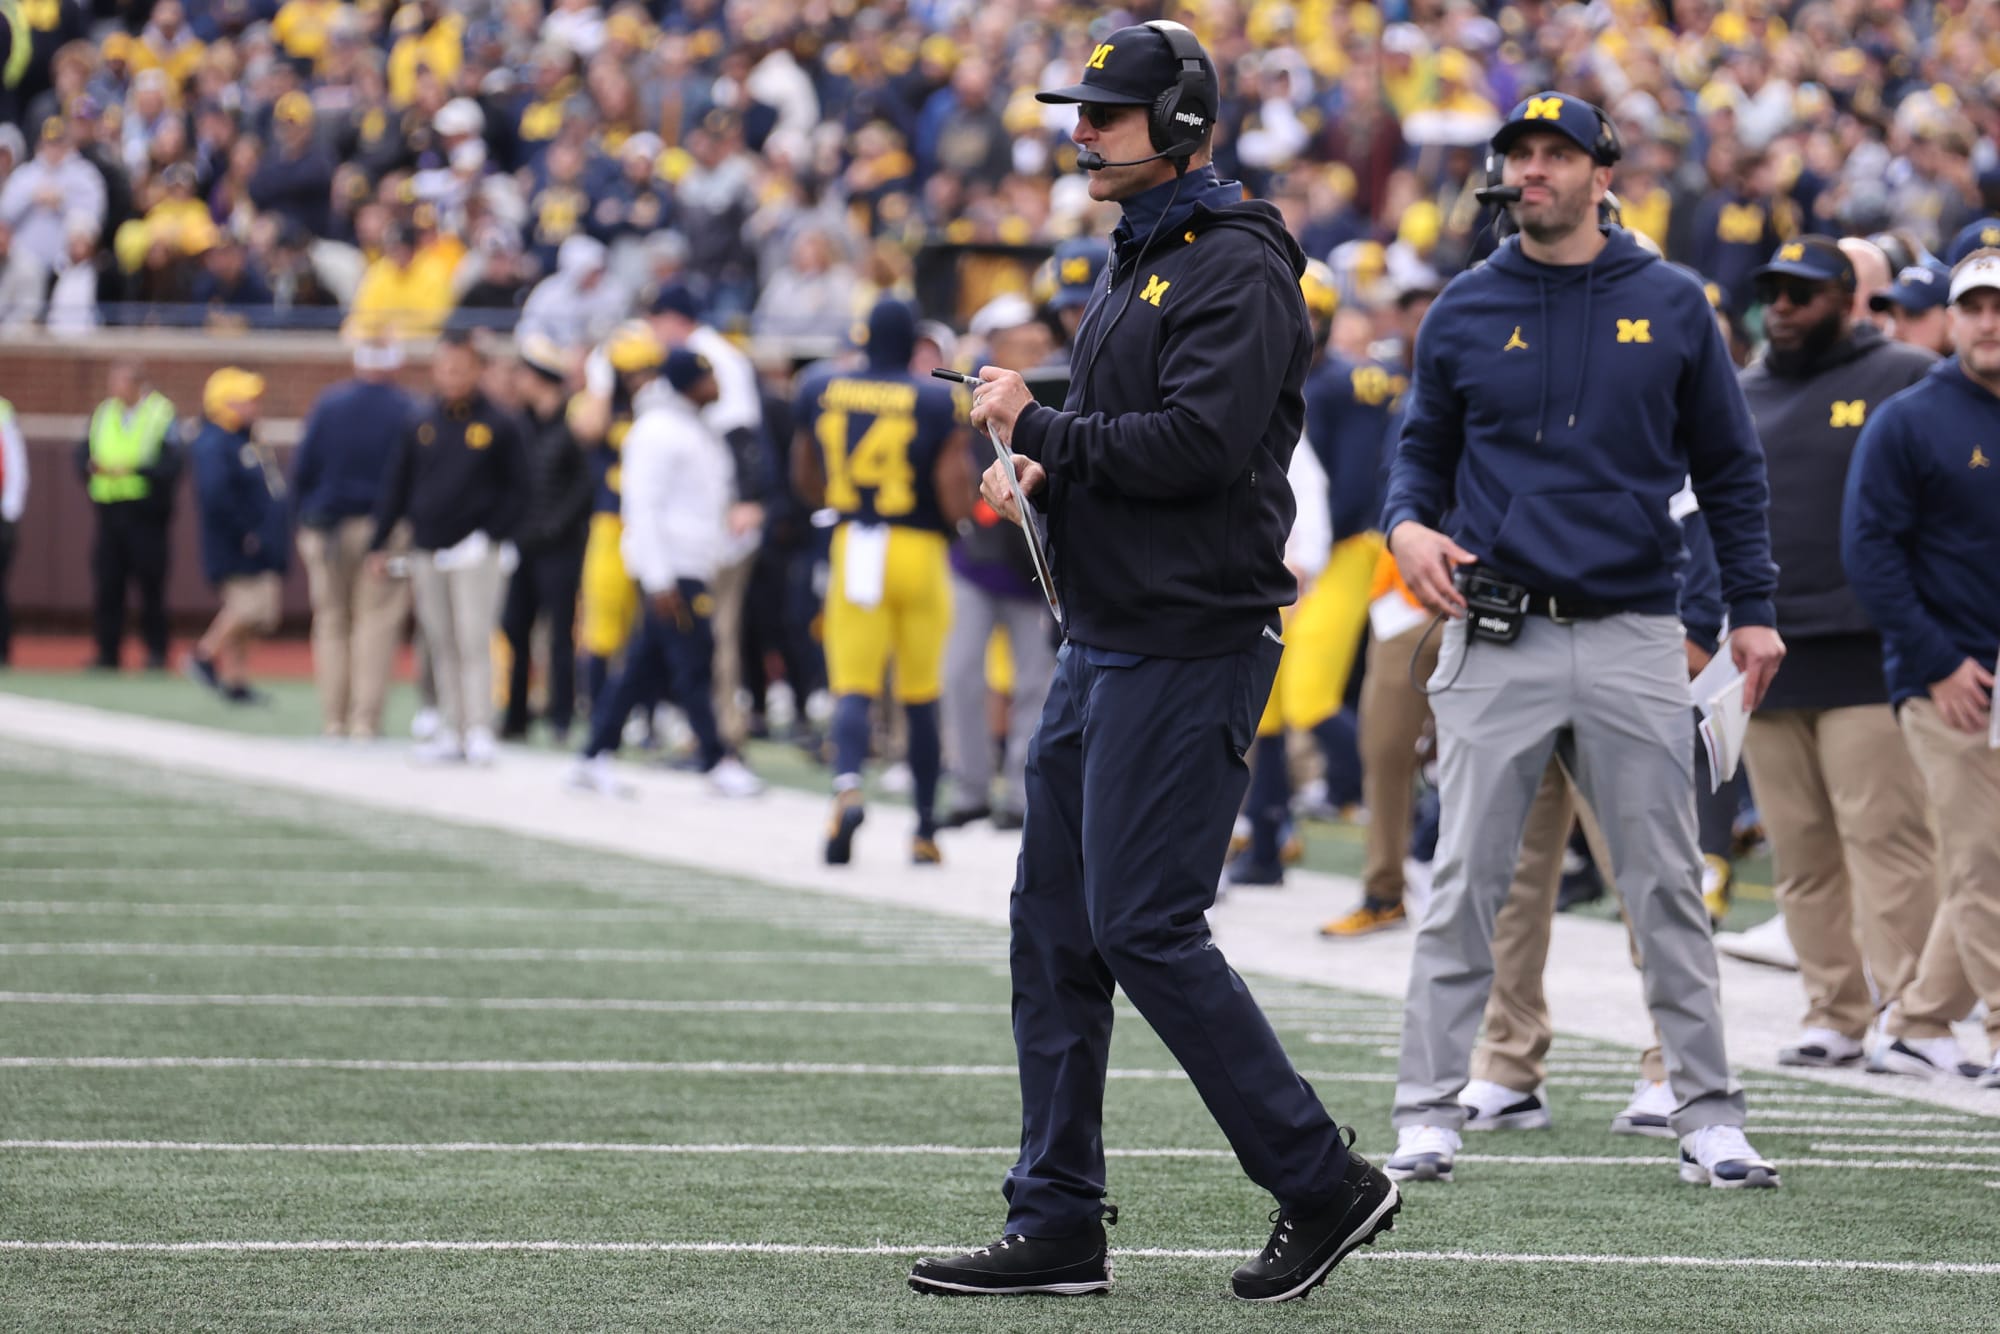 Ohio State Football Michigan fires OC Wiess as investigation unfolds